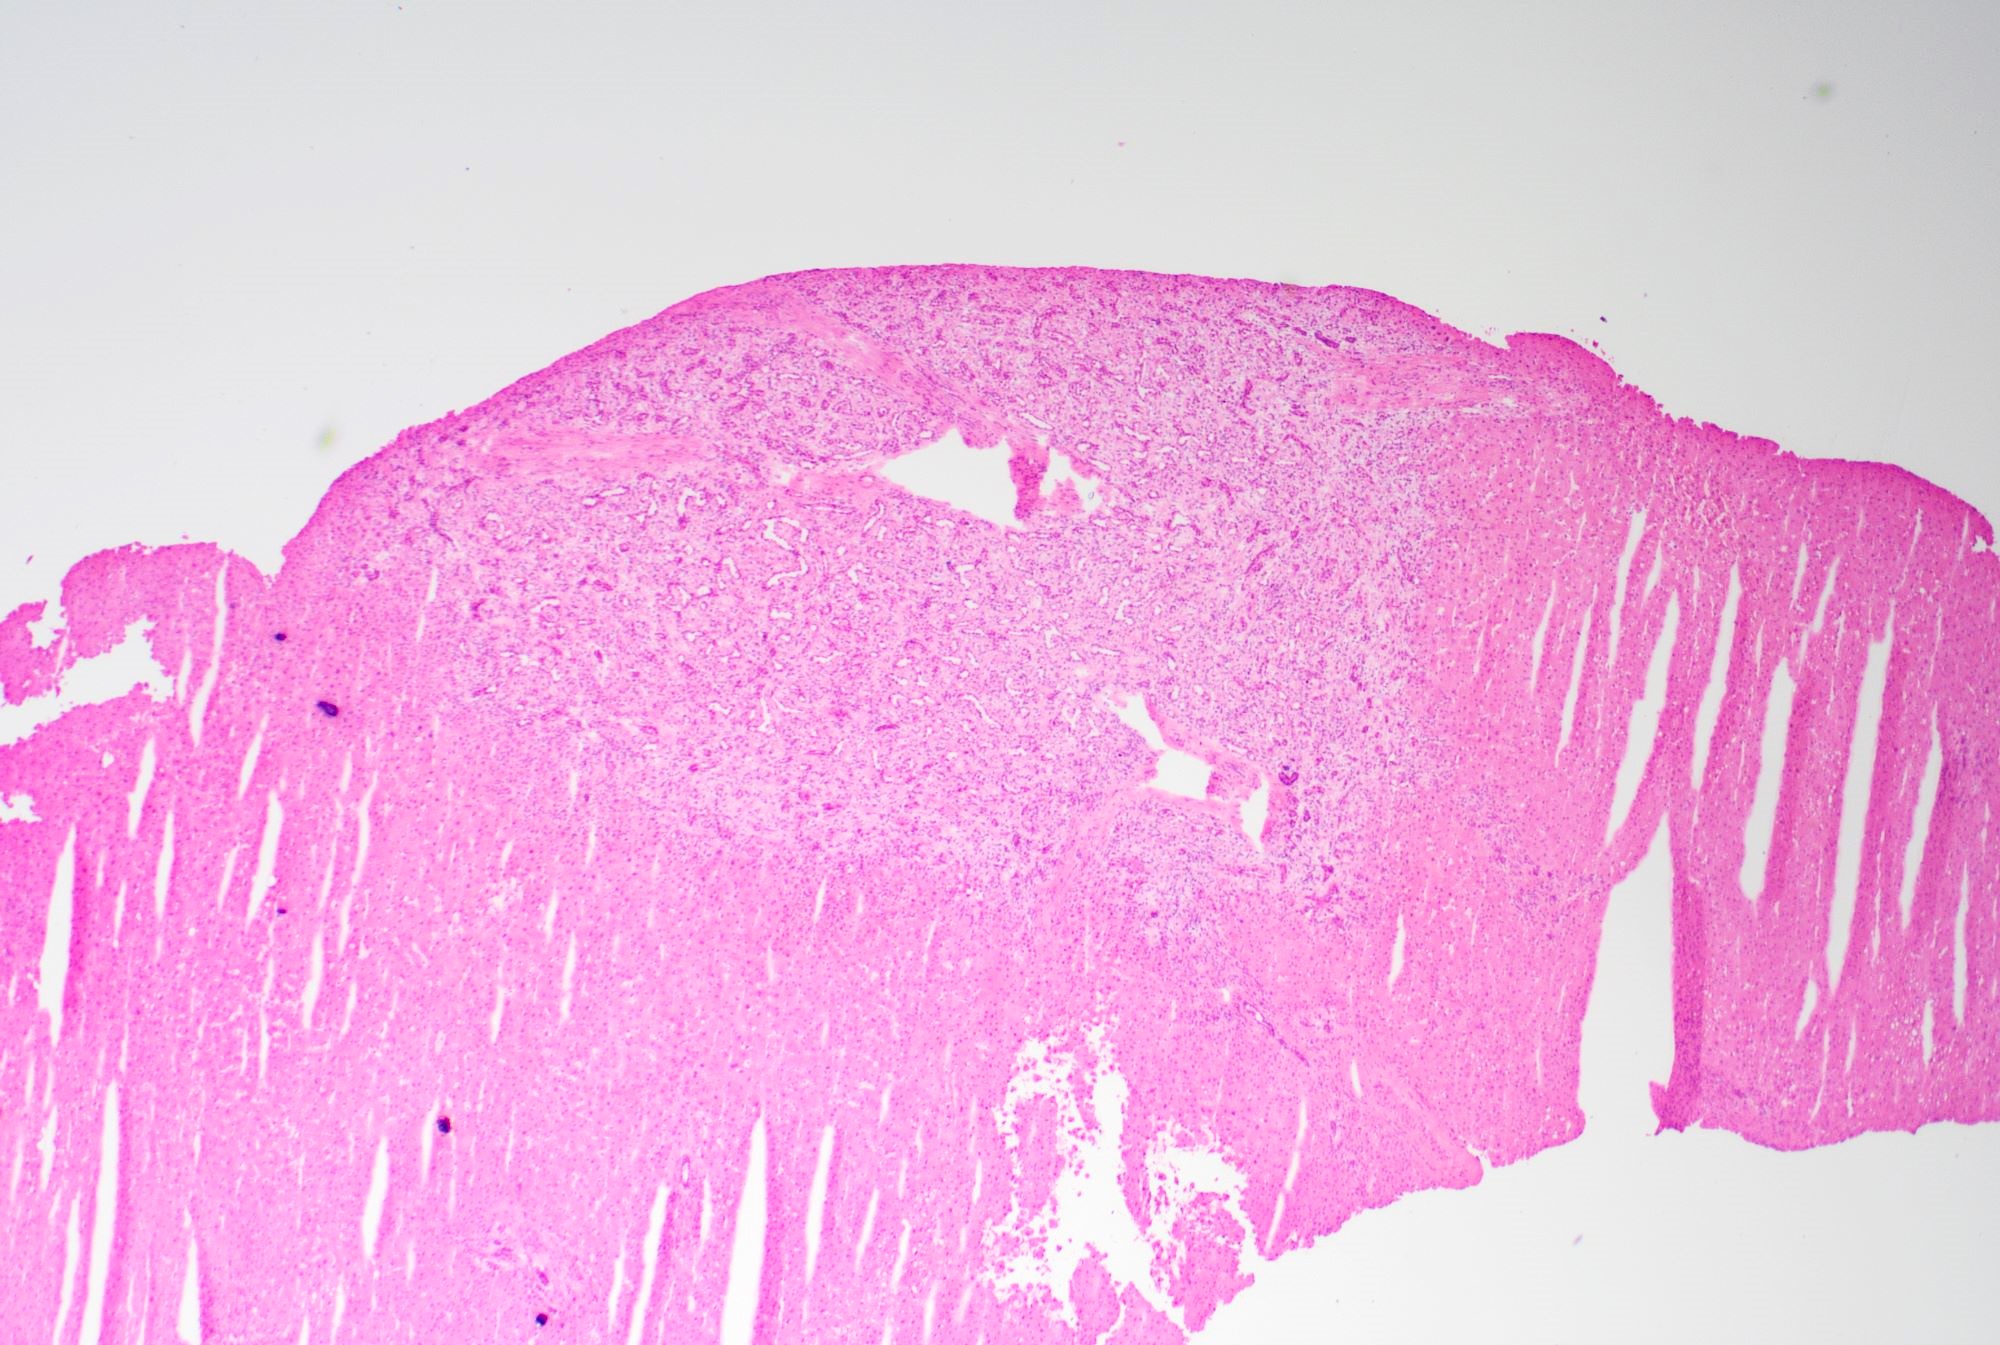 Well circumscribed unencapsulated lesion